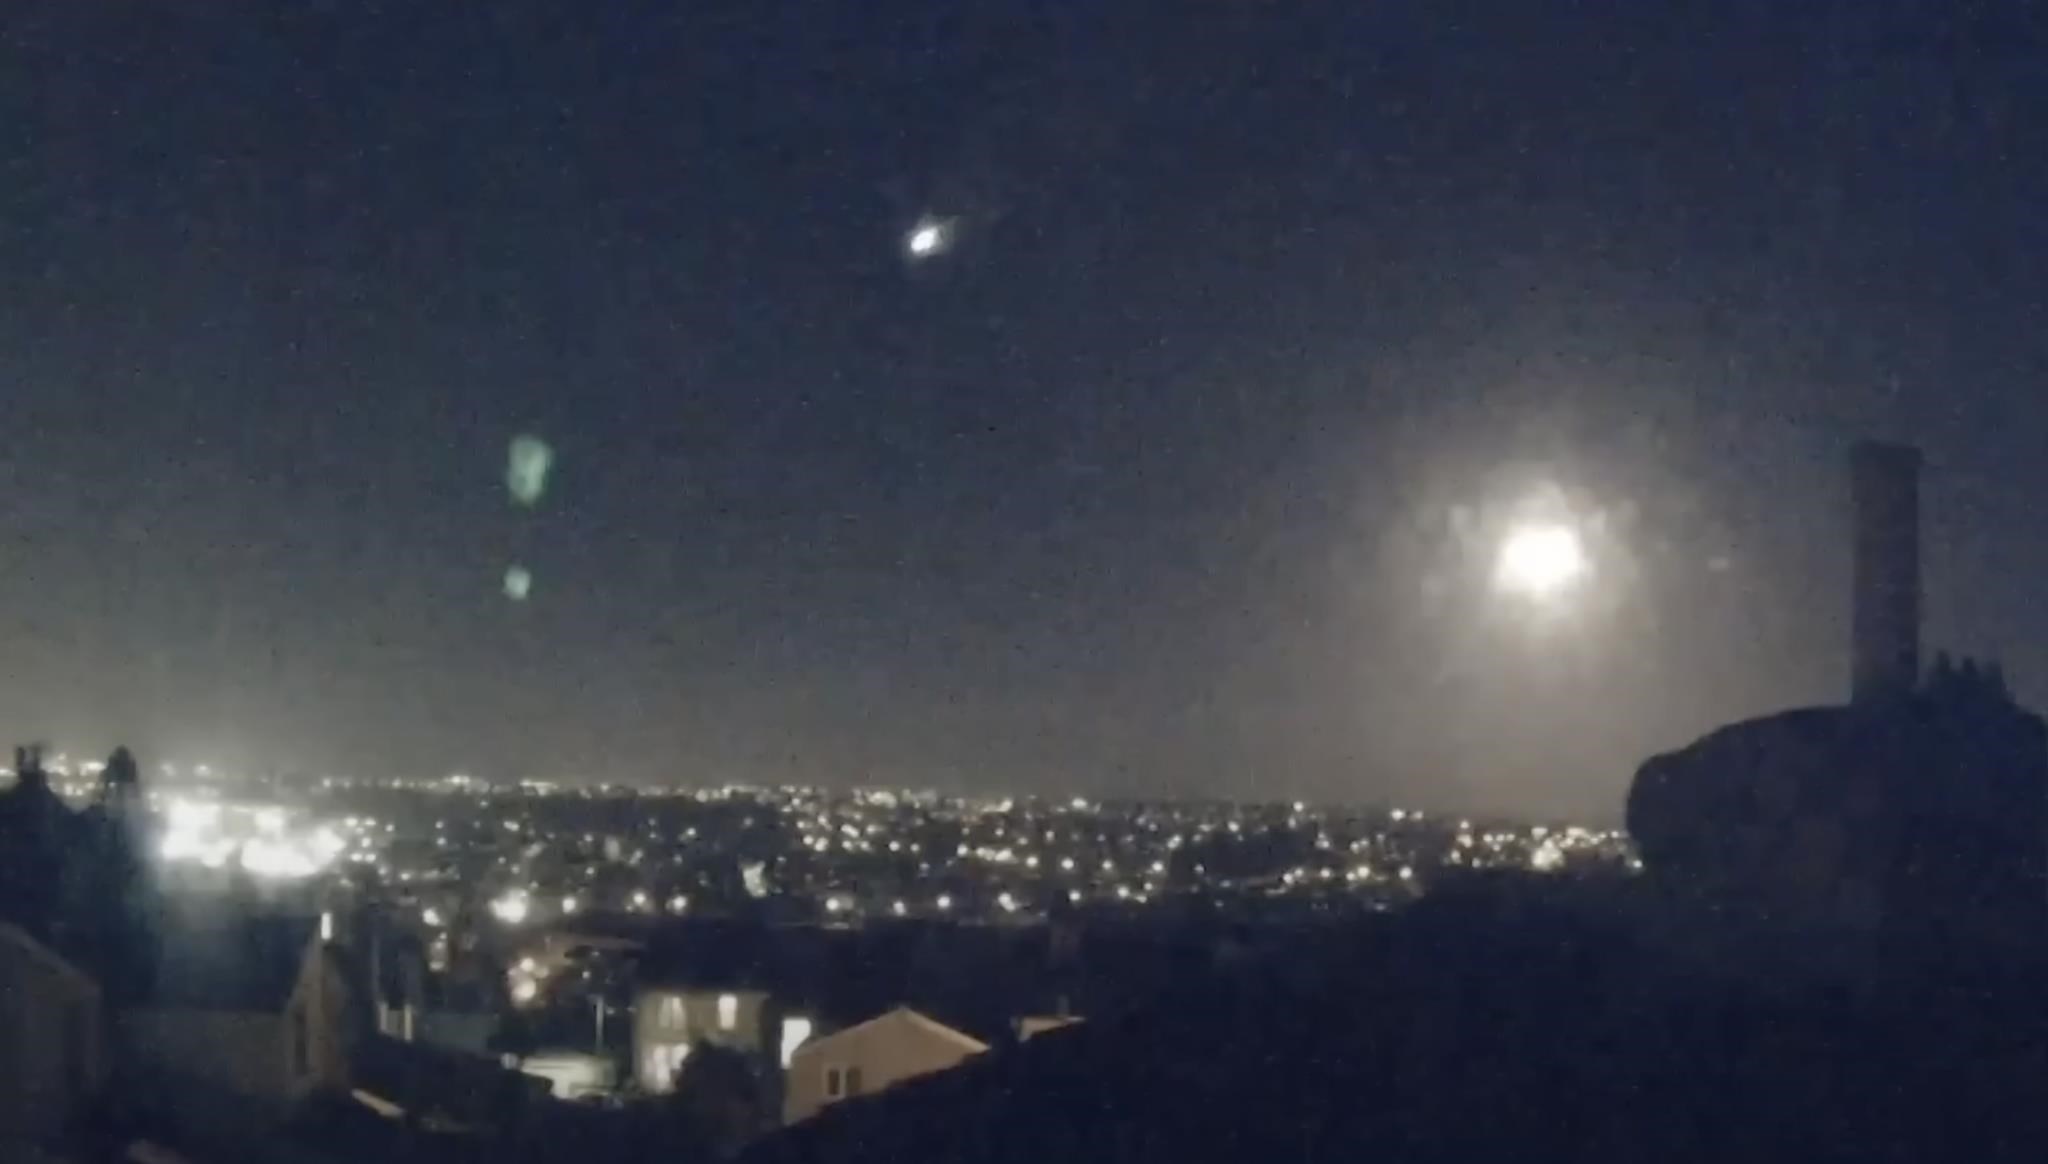 Tech: A meteor streaked over the UK, the fireball caught in several videos